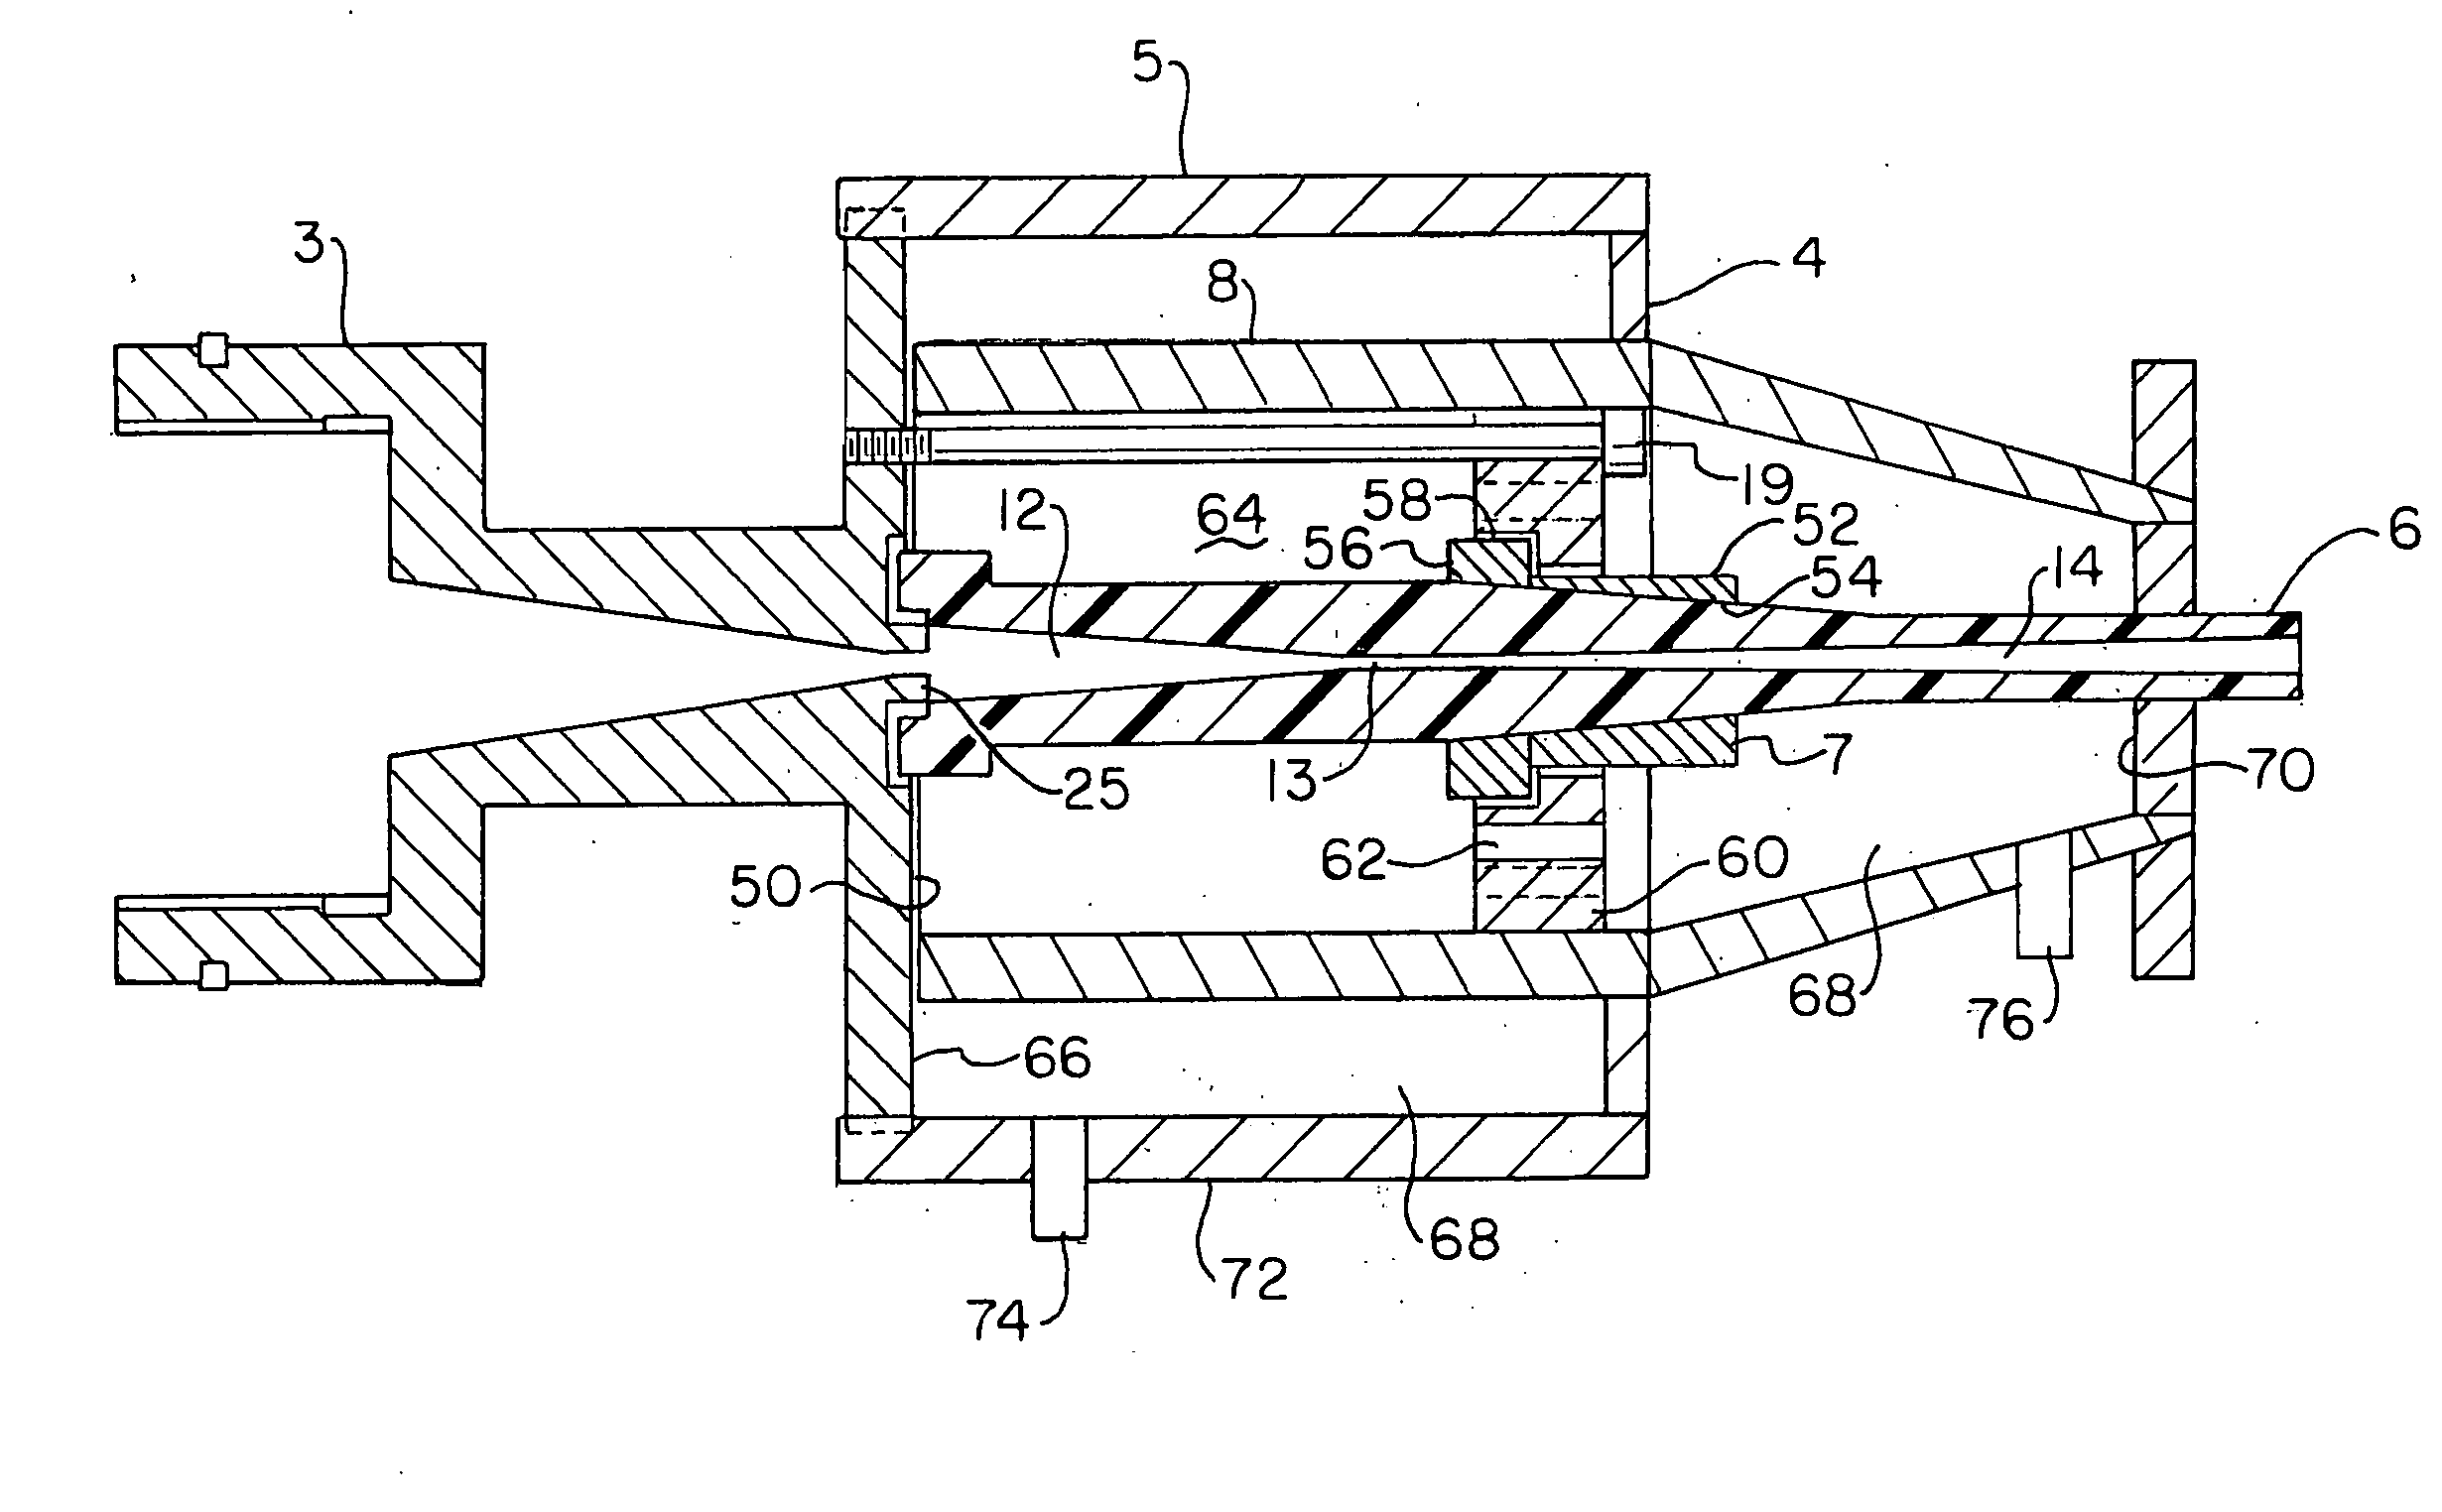 Spray nozzle assembly for gas dynamic cold spray and method of coating a substrate with a high temperature coating